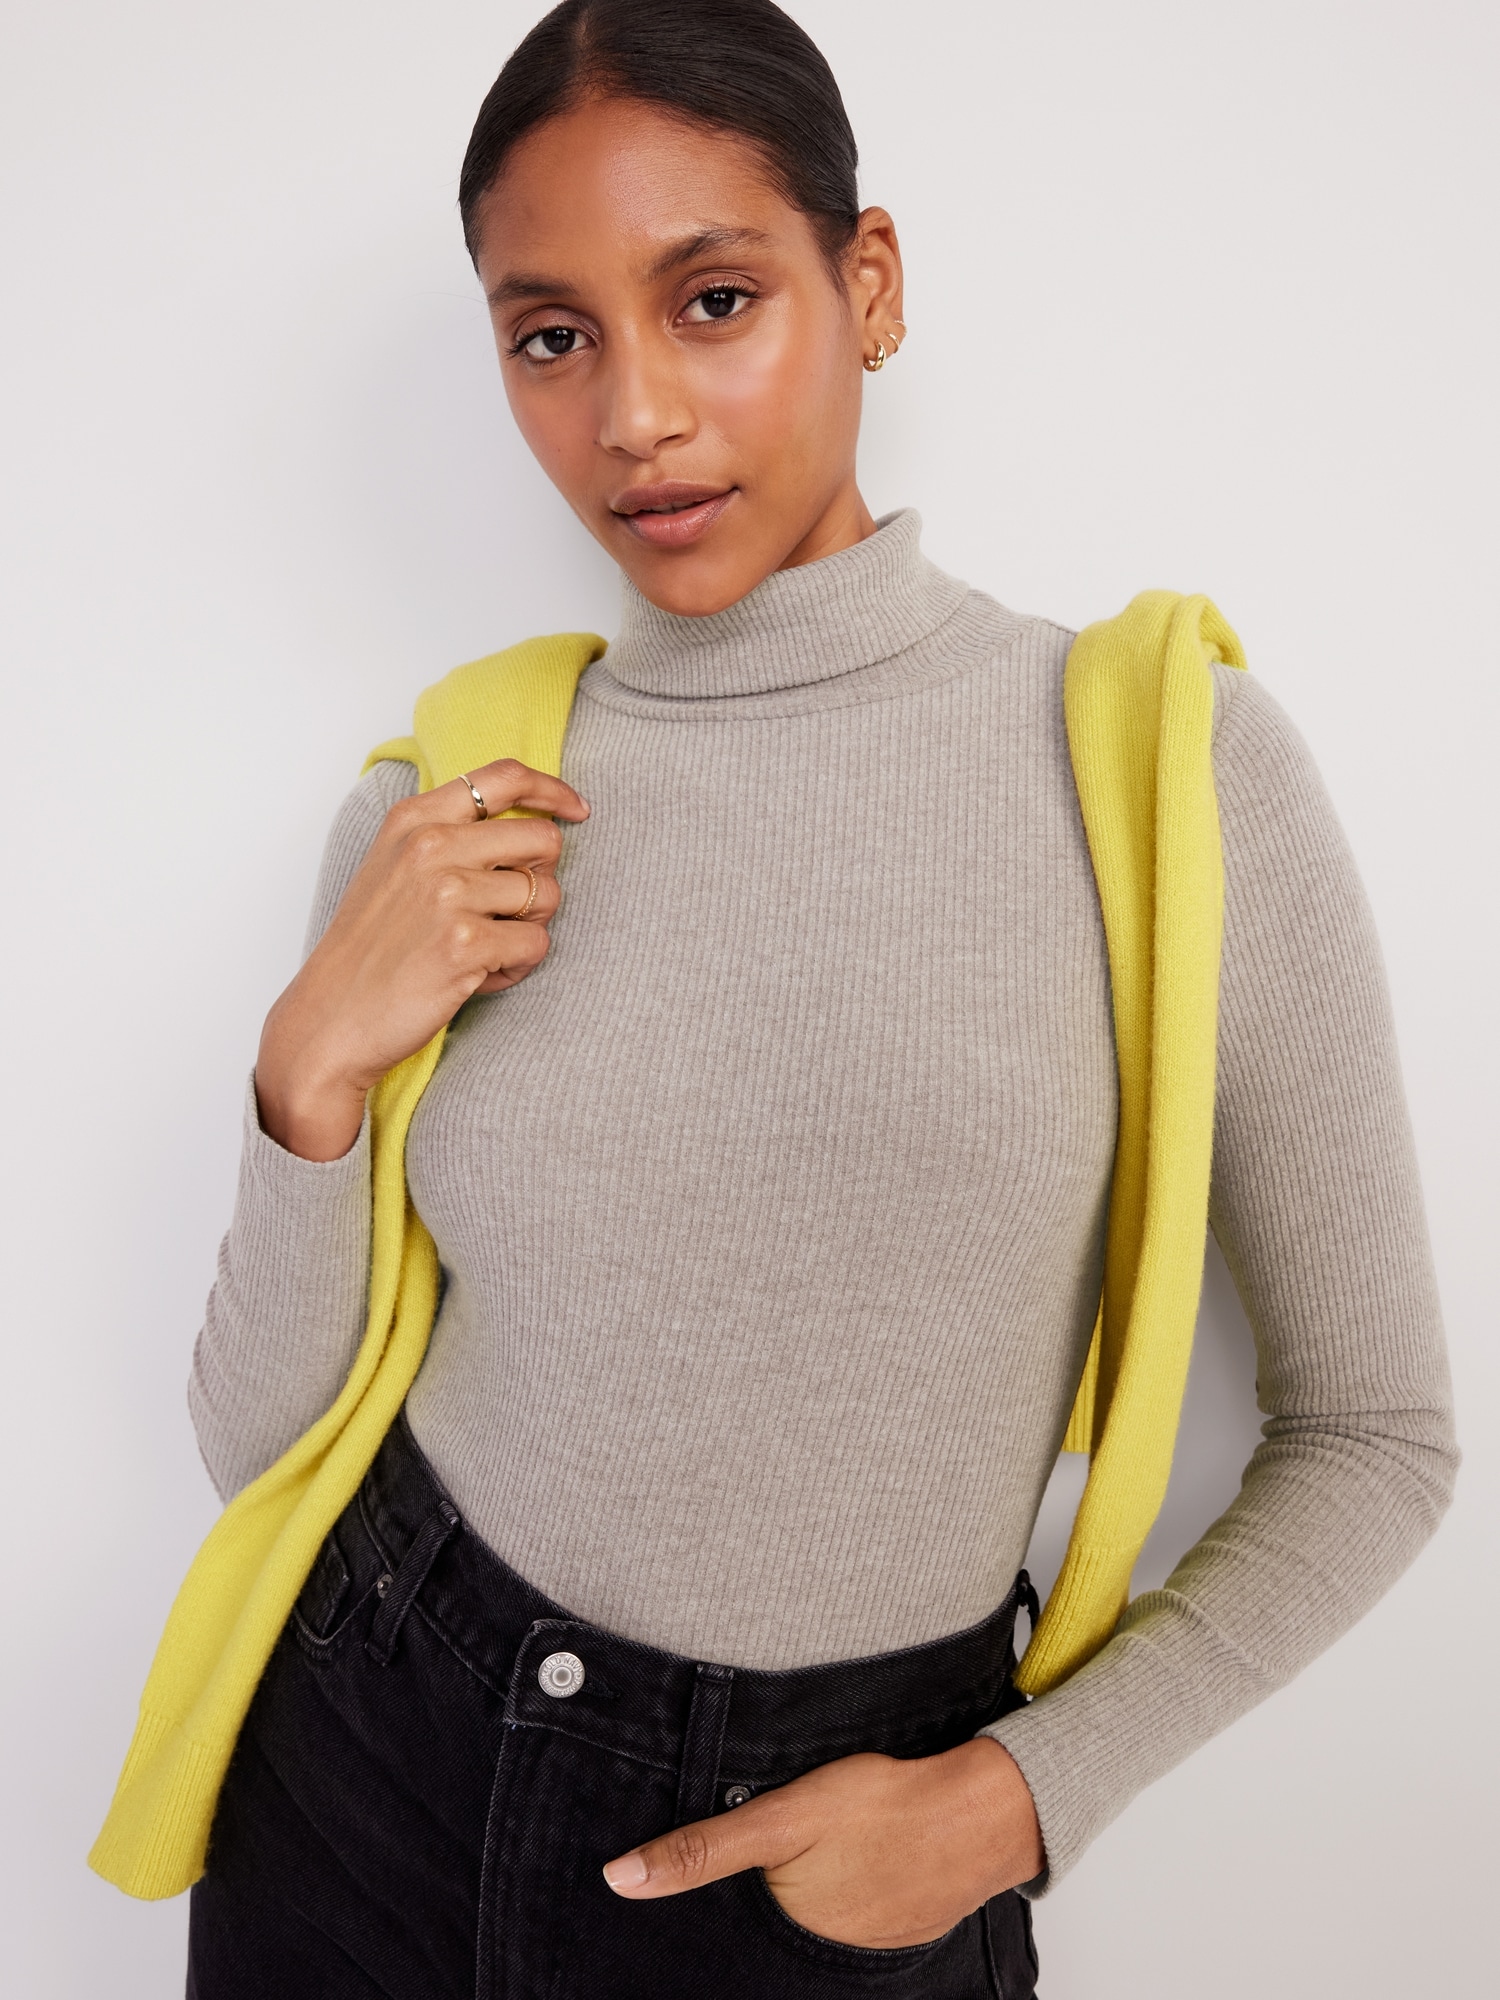 Fitted Plush Rib-Knit Turtleneck | Old Navy